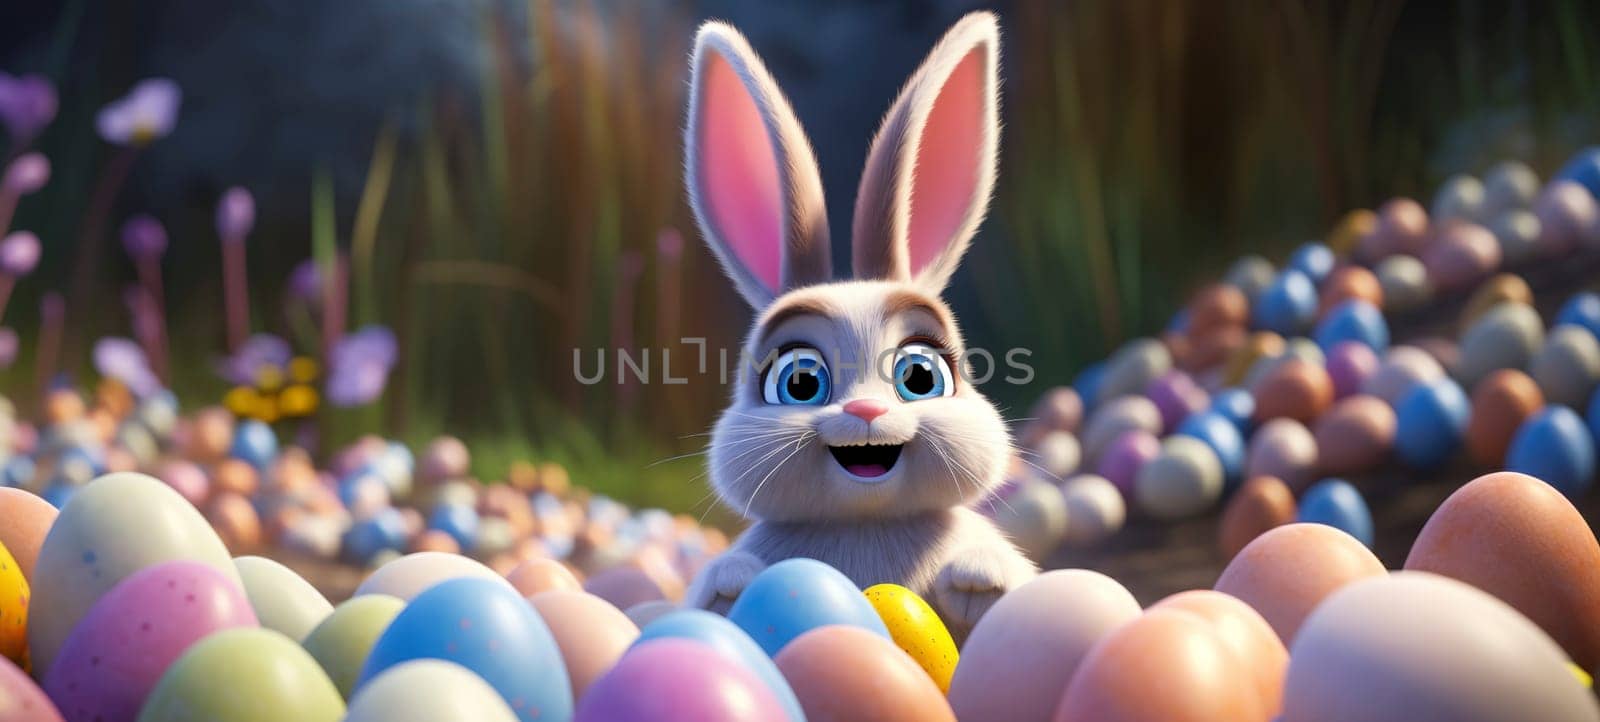 Joyful Cartoon Rabbit with Colorful Easter Eggs in a Spring Meadow.